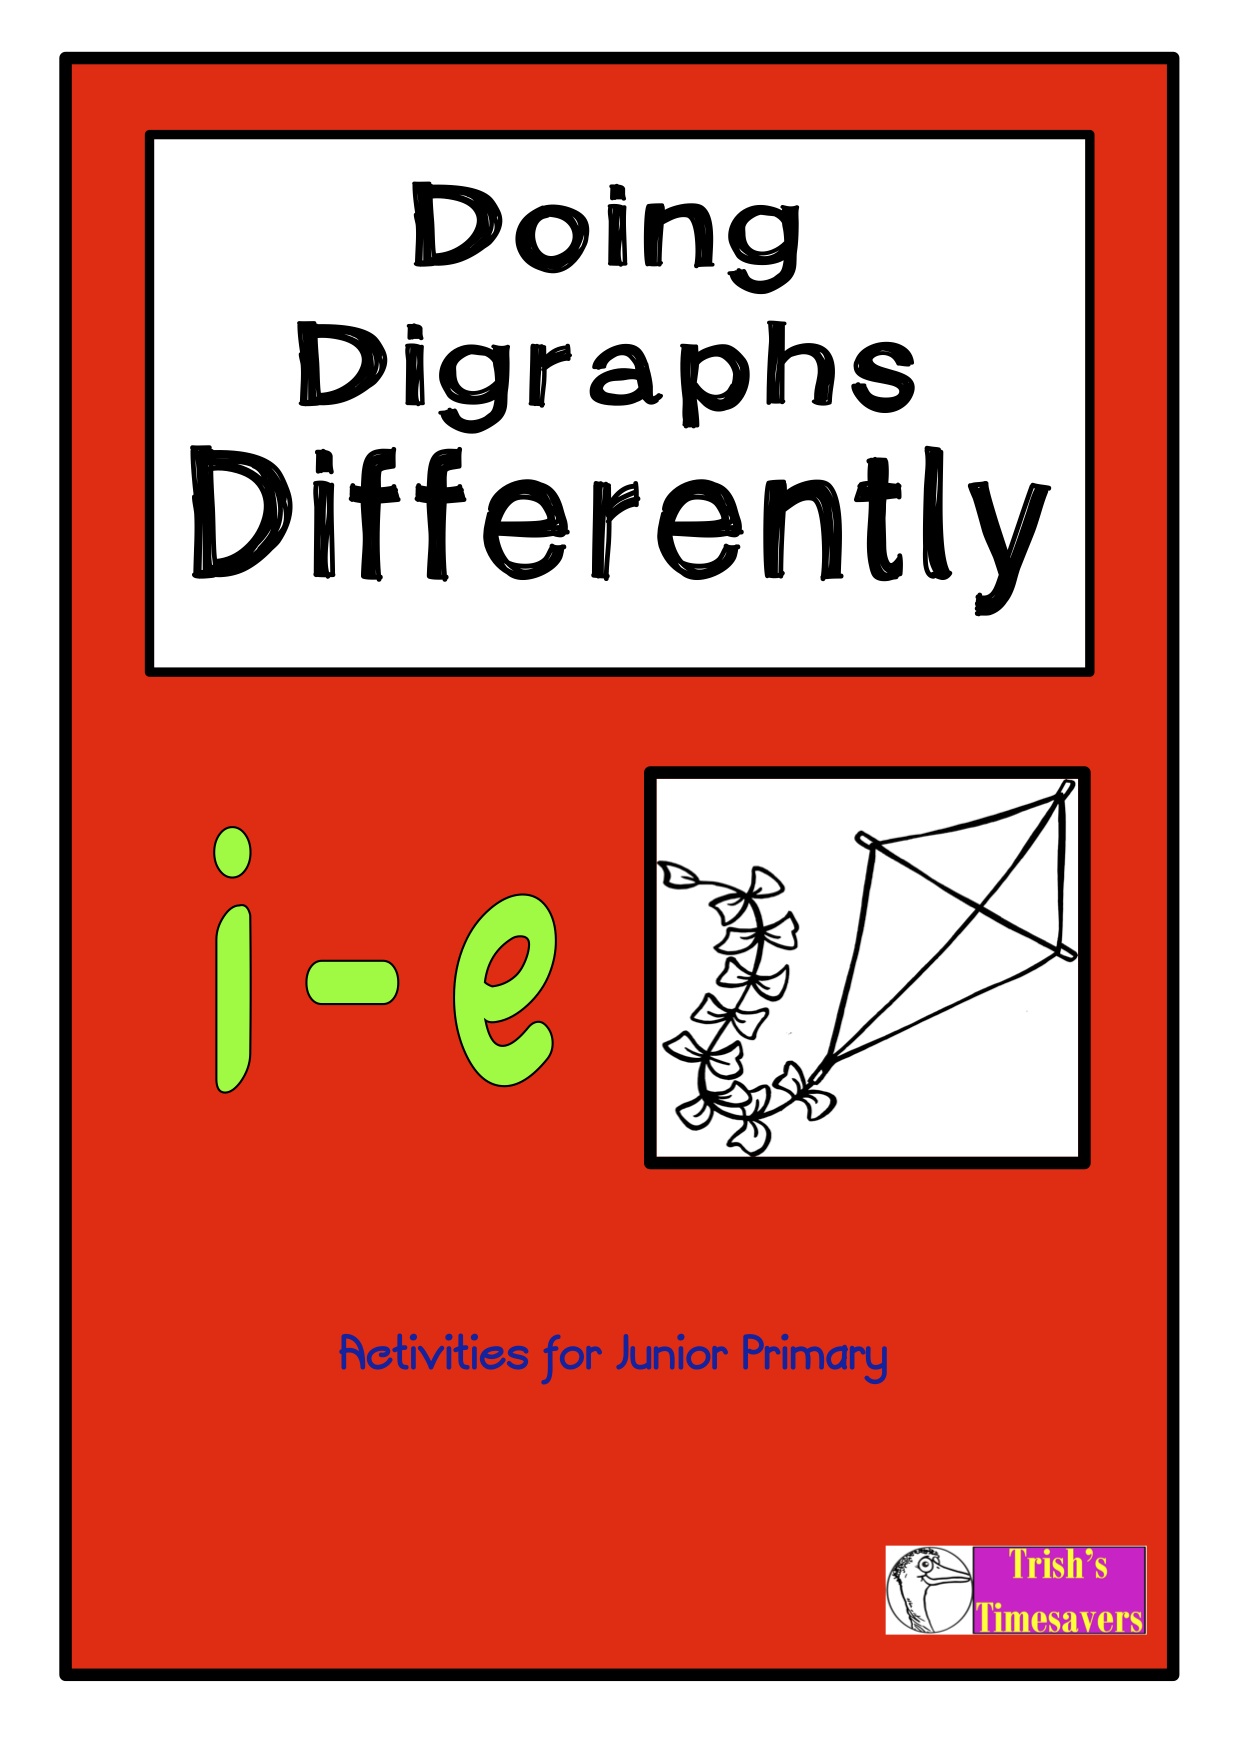 Doing Digraphs Differently i-e